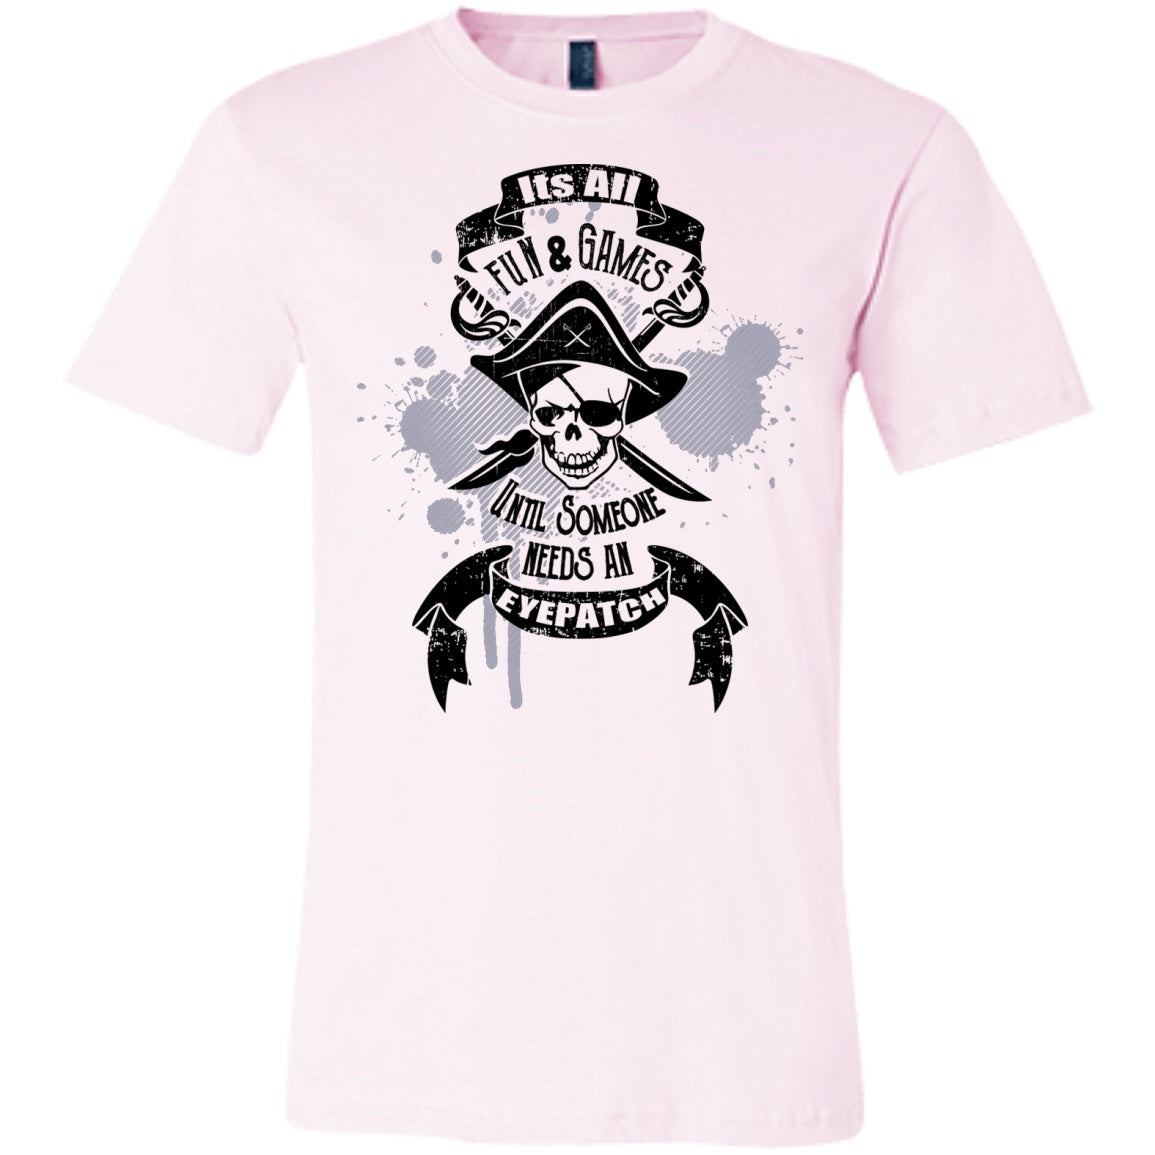 It's All Fun And Games Until Someone Needs An Eyepatch - Unisex and Wo ...